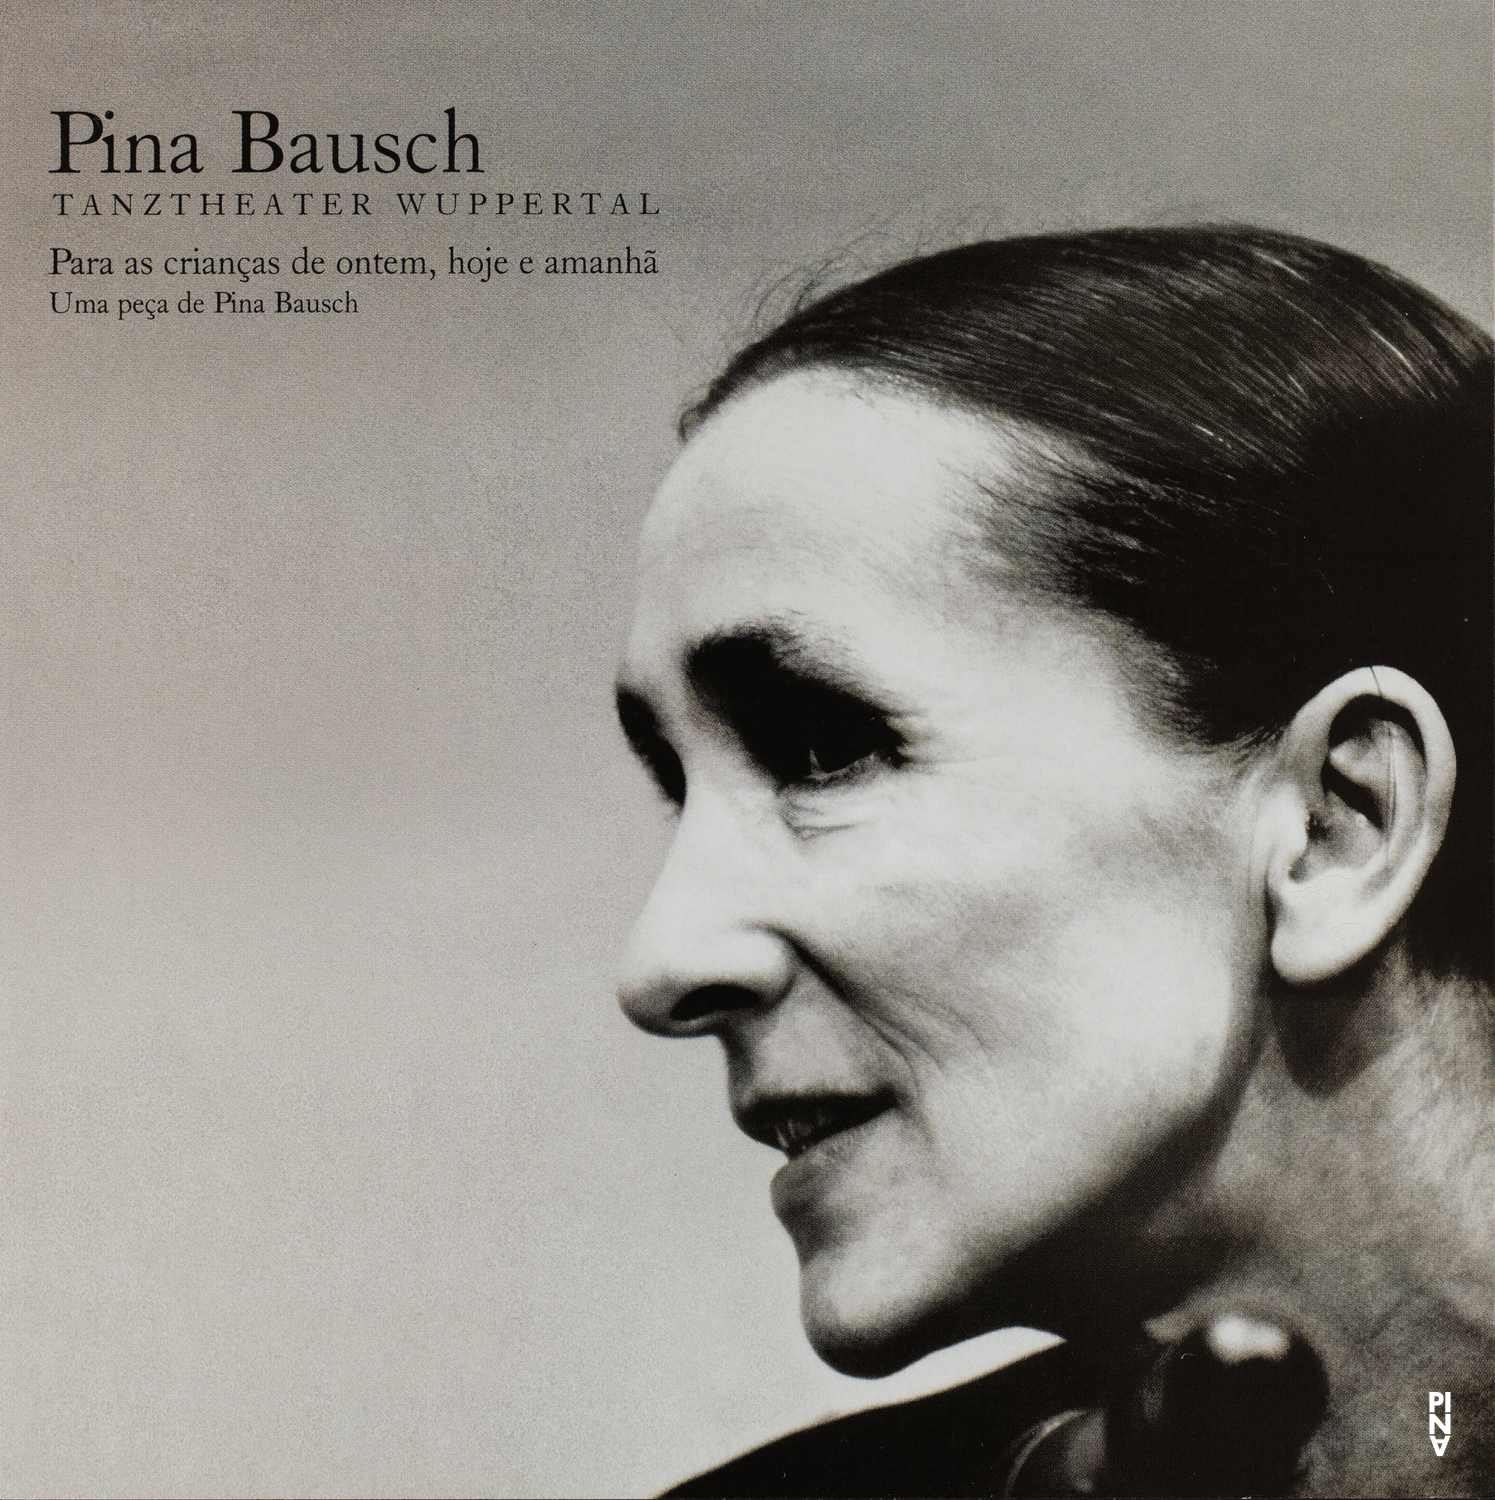 Booklet for “For the Children of Yesterday, Today and Tomorrow” by Pina Bausch with Tanztheater Wuppertal in in São Paulo, 08/28/2006 – 09/03/2006